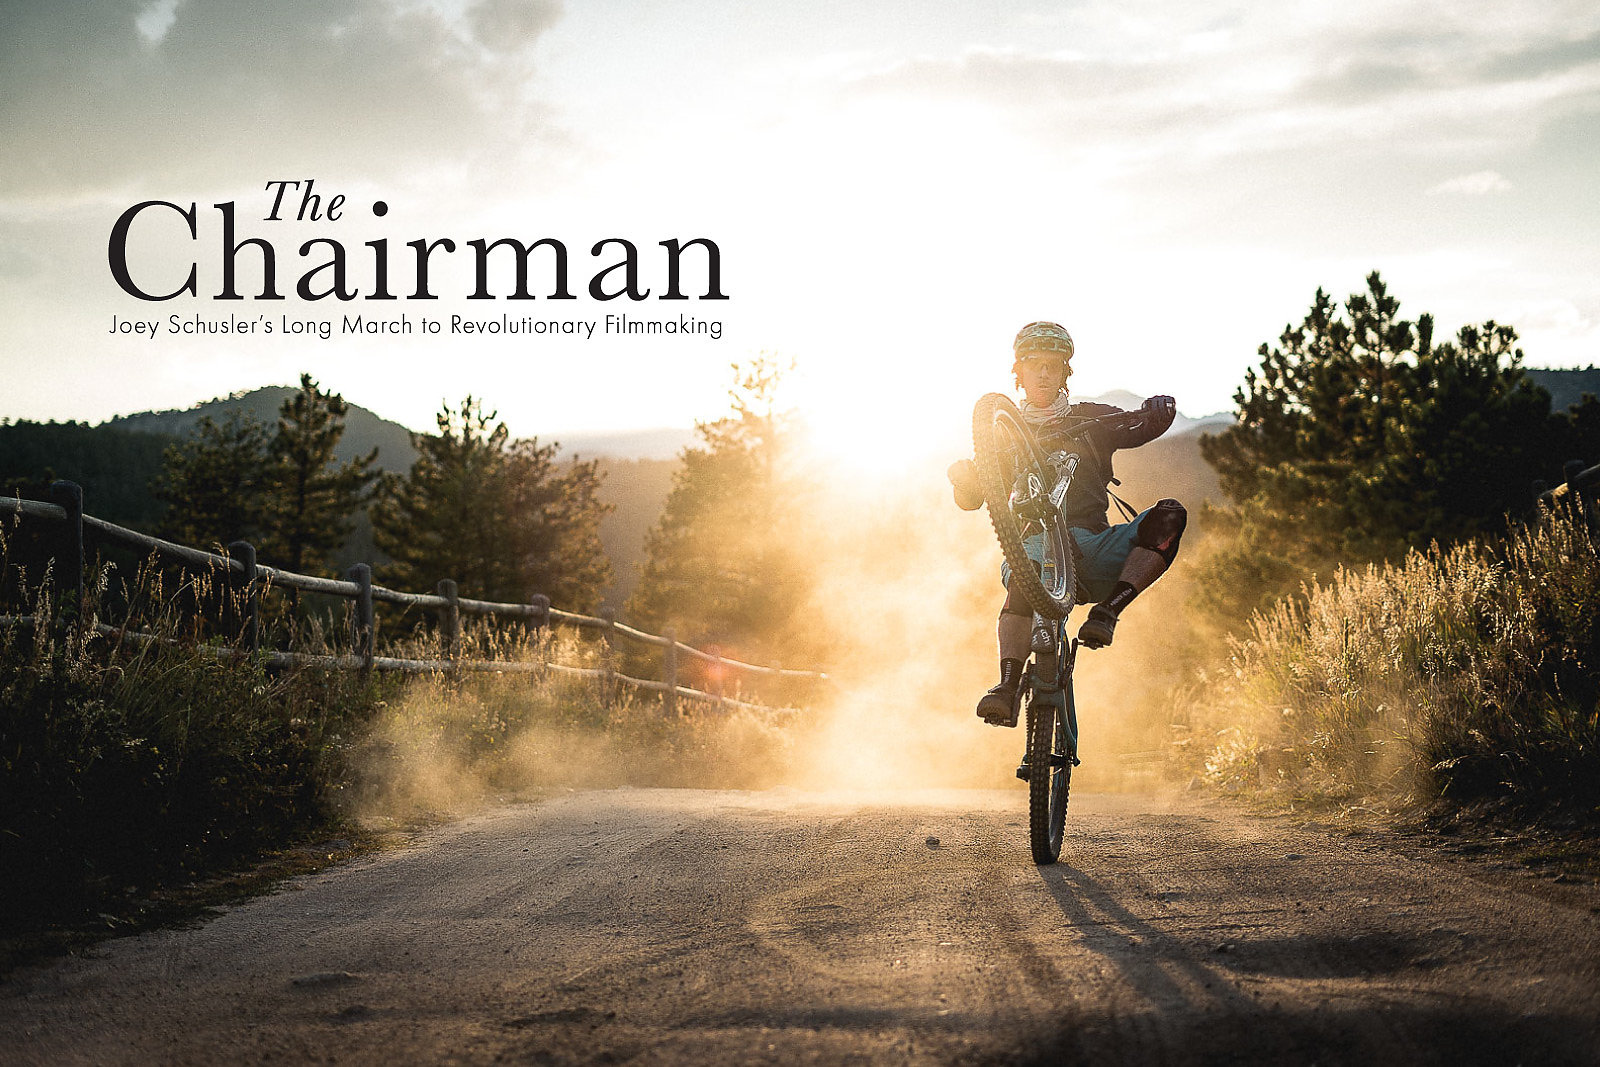 Opening spread from "The Chairman" as seen in Freehub Magazine Issue 8.4.